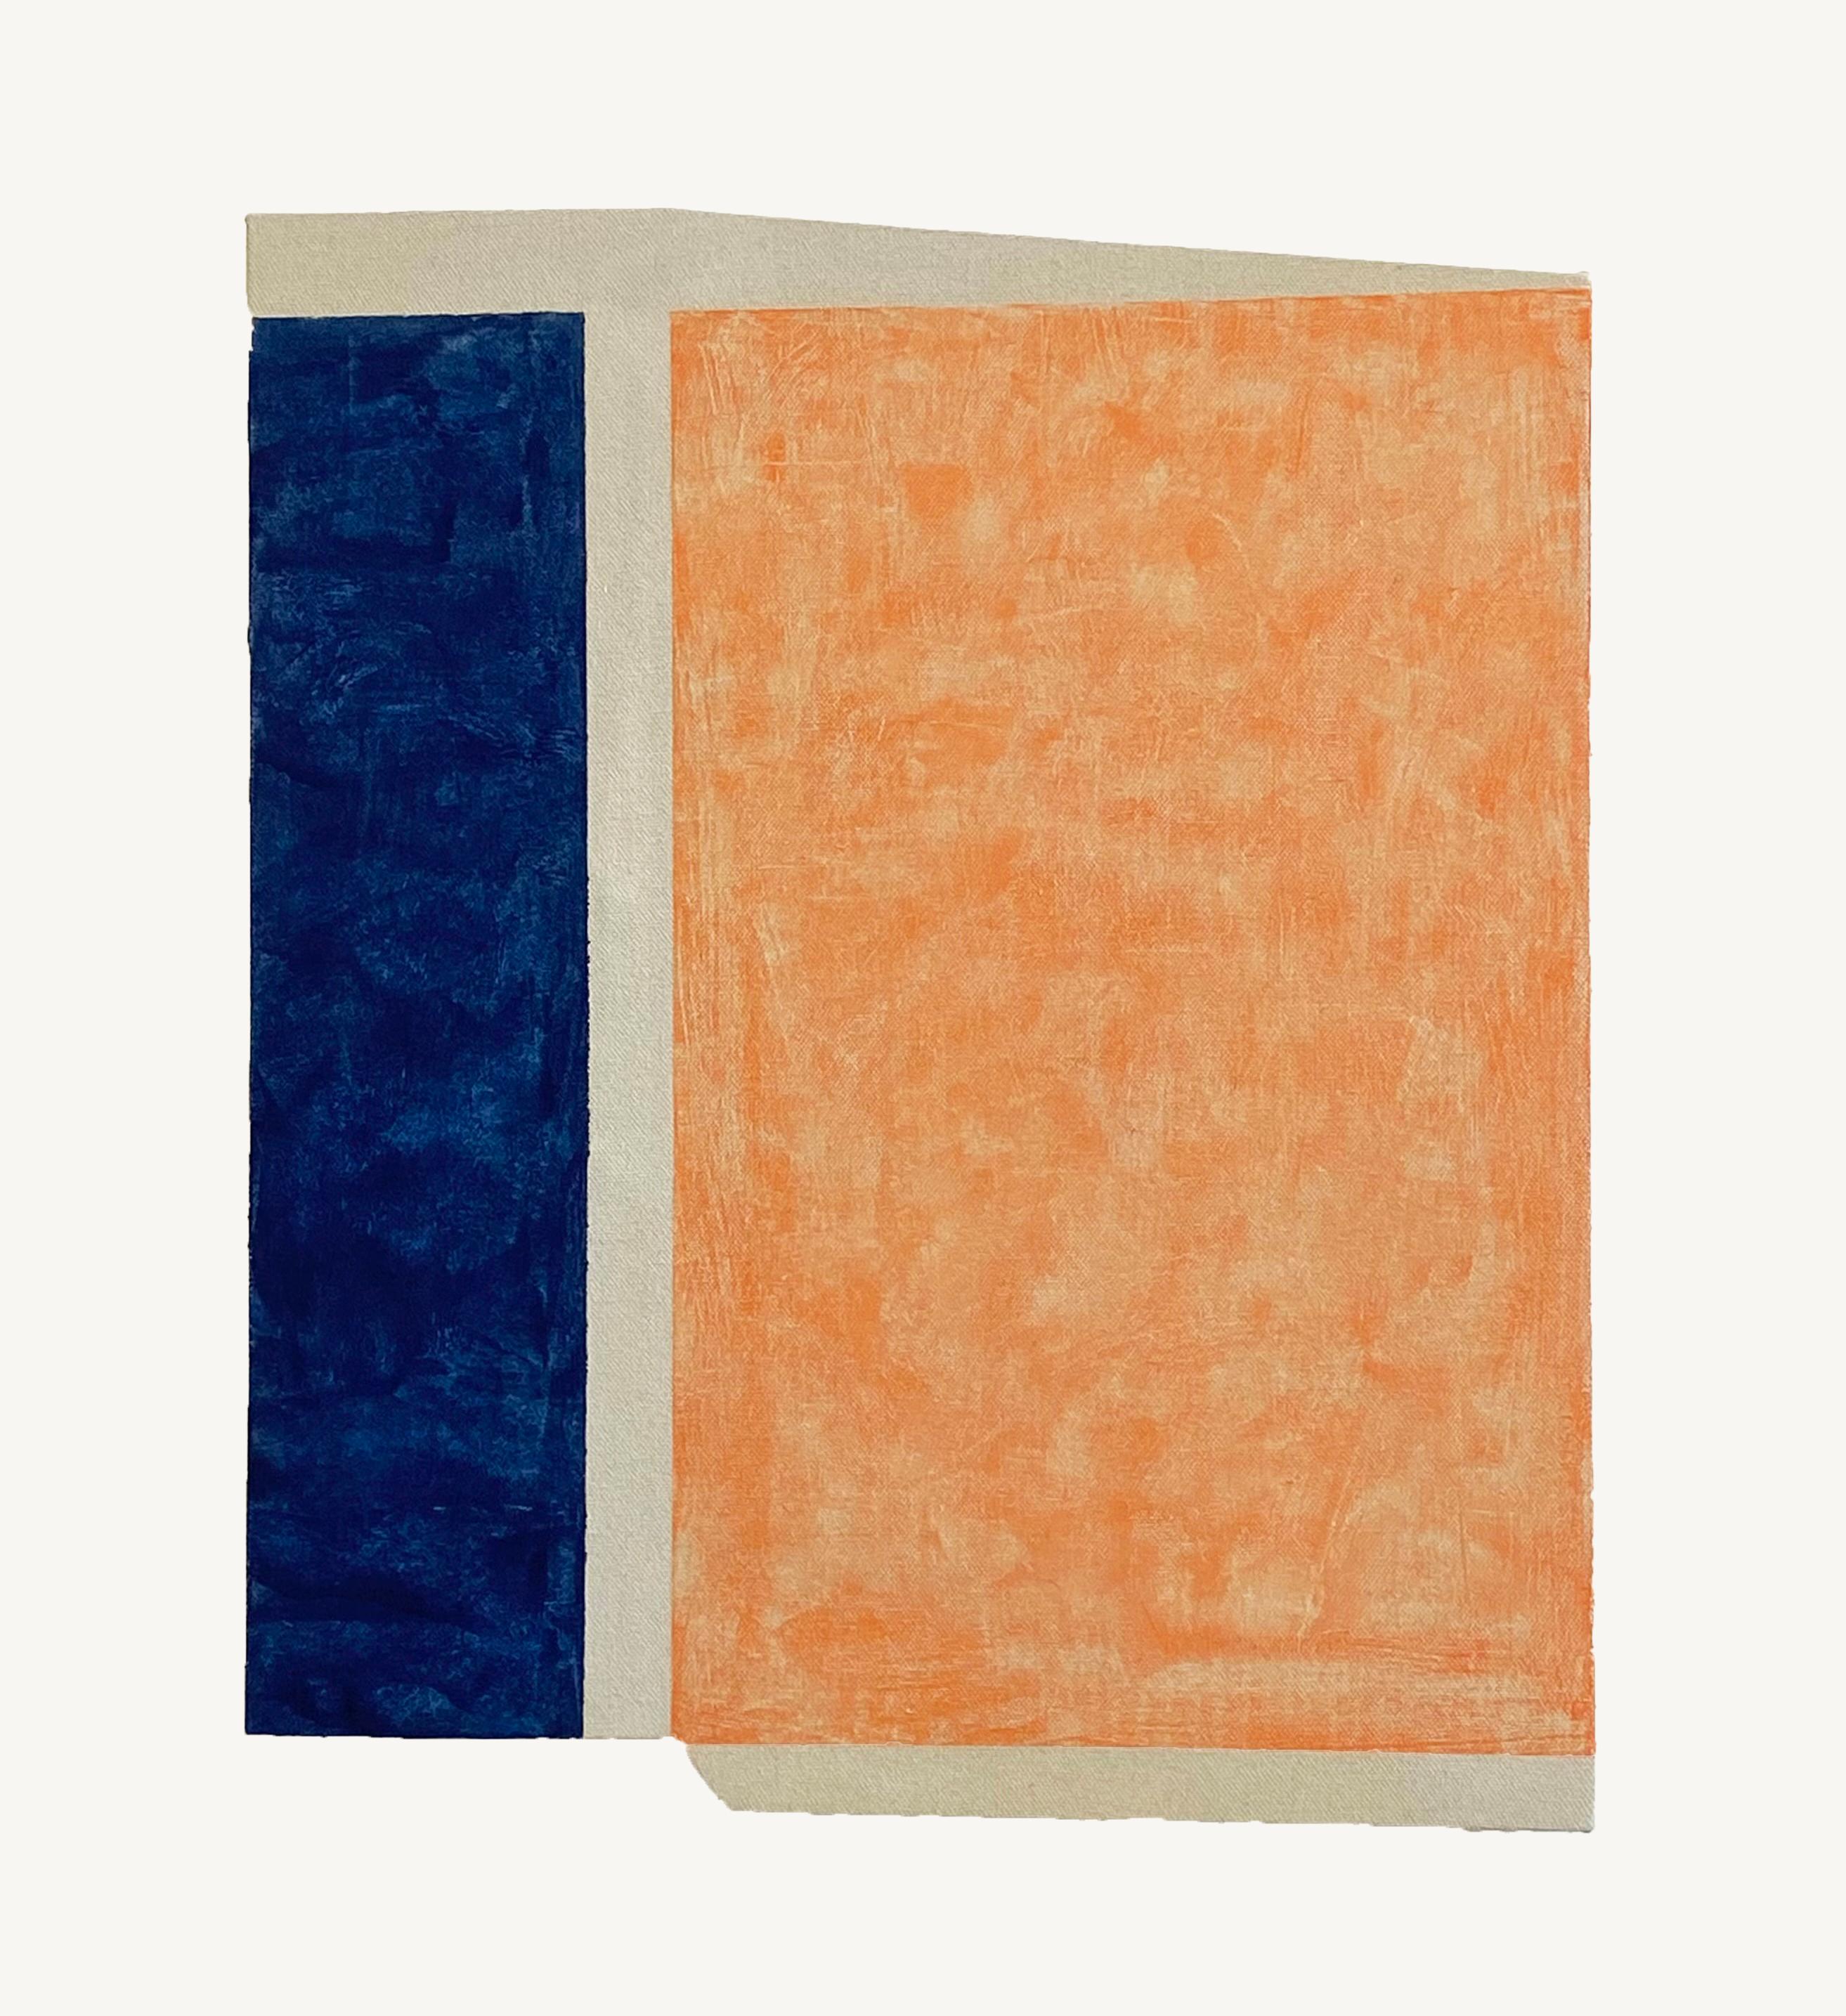 Elizabeth Gourlay Abstract Painting - F30, Apricot Orange, Dark Lapis Blue, Geometric Abstract Shaped Panel Painting